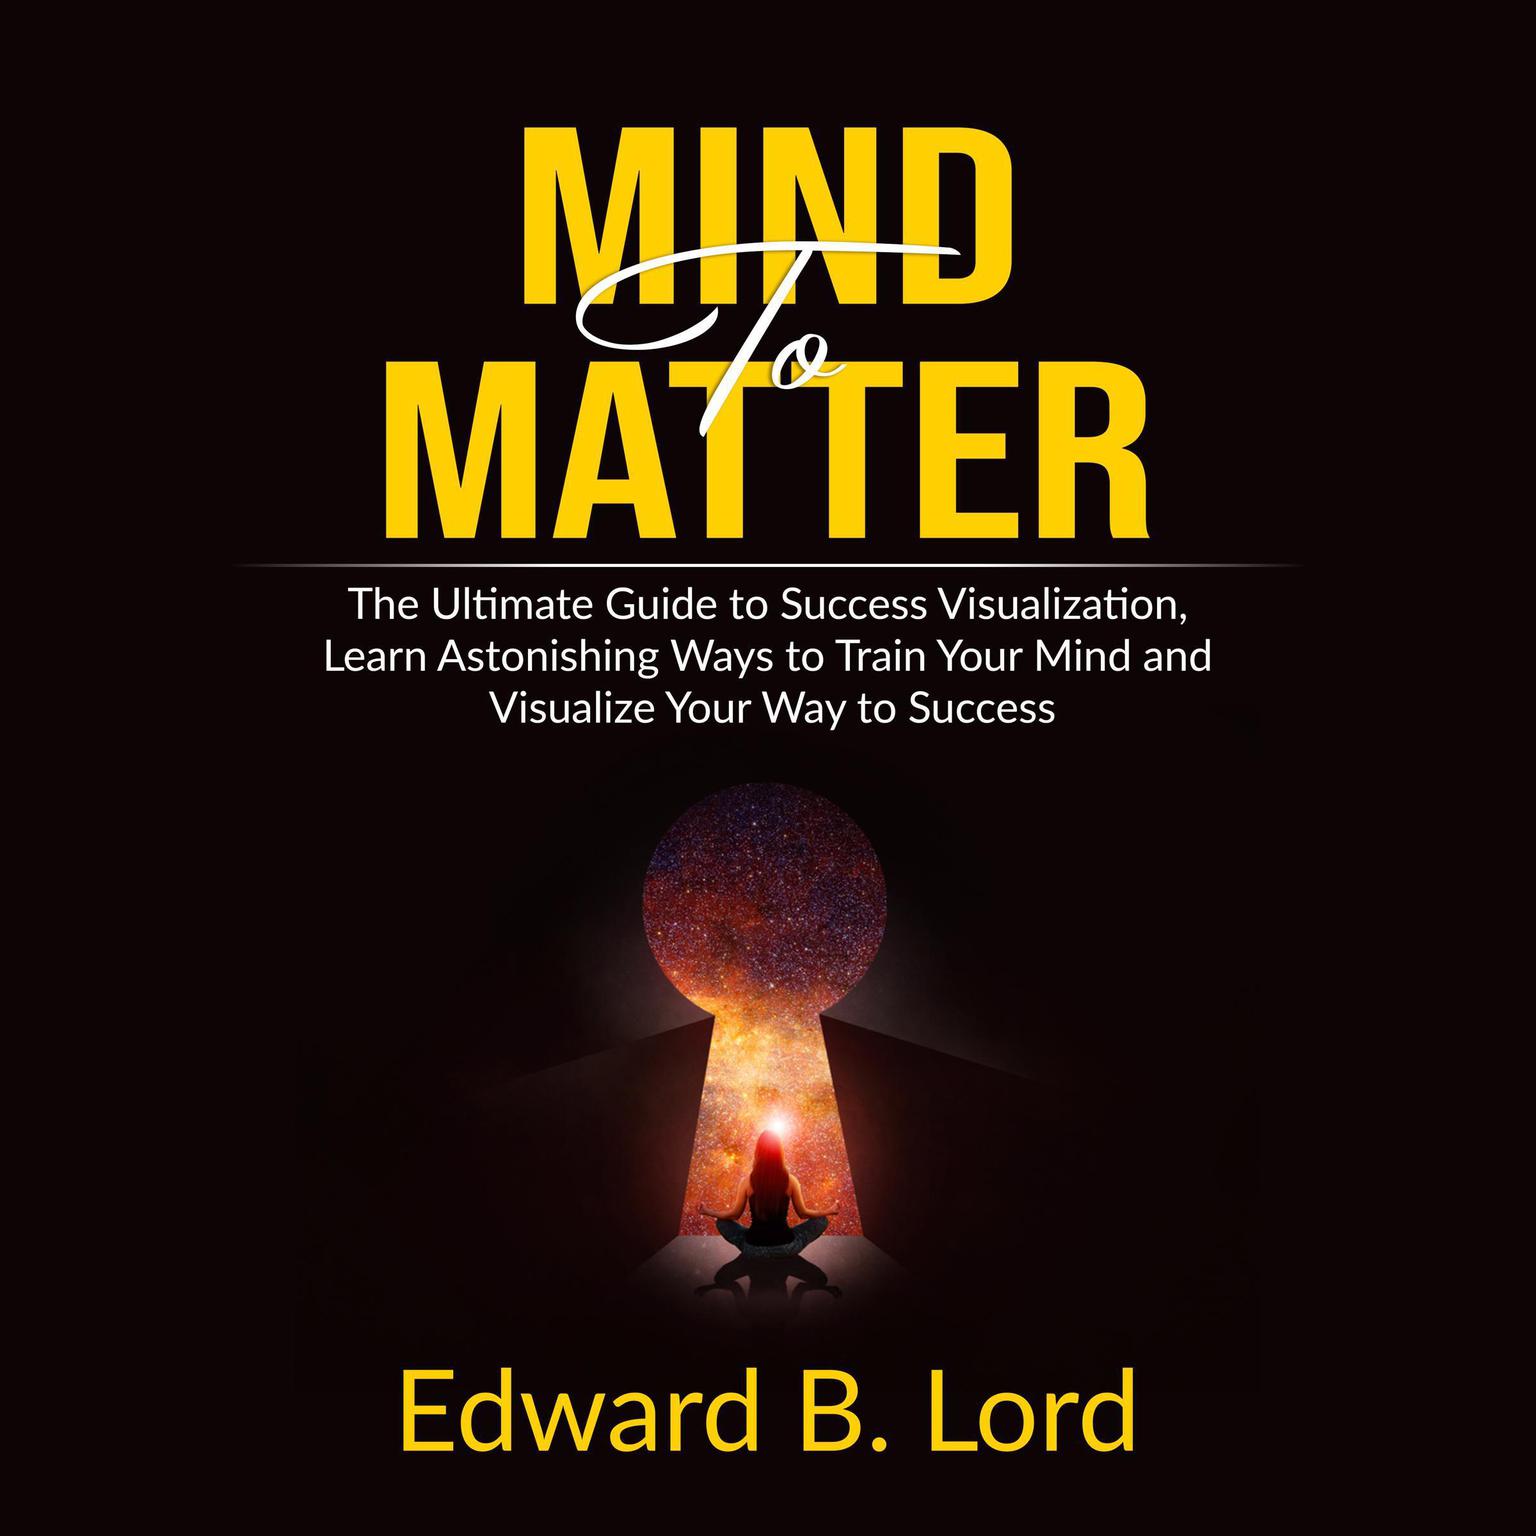 Mind to Matter: The Ultimate Guide to Success Visualization, Learn Astonishing Ways to Train Your Mind and Visualize Your Way to Success Audiobook, by Edward B. Lord